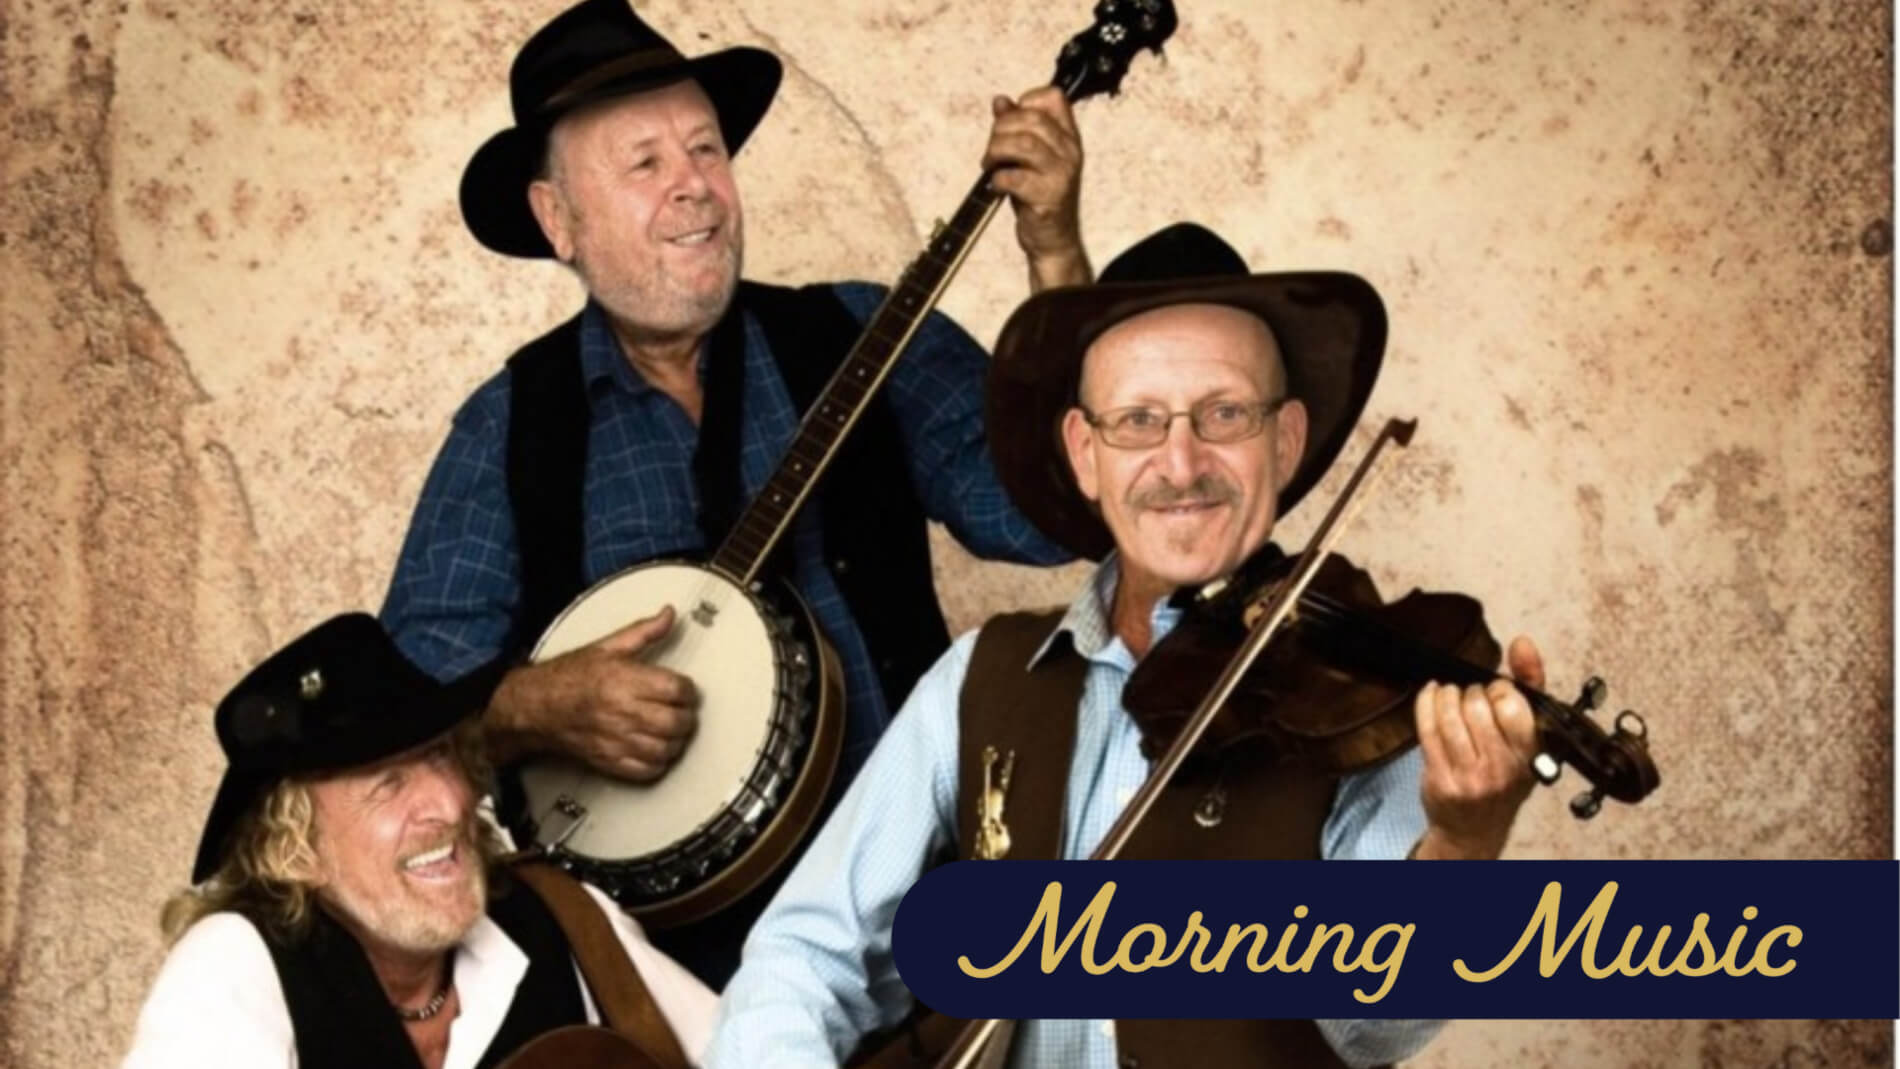 The Southern Star Band featuring in our August 2022 Morning Music Program